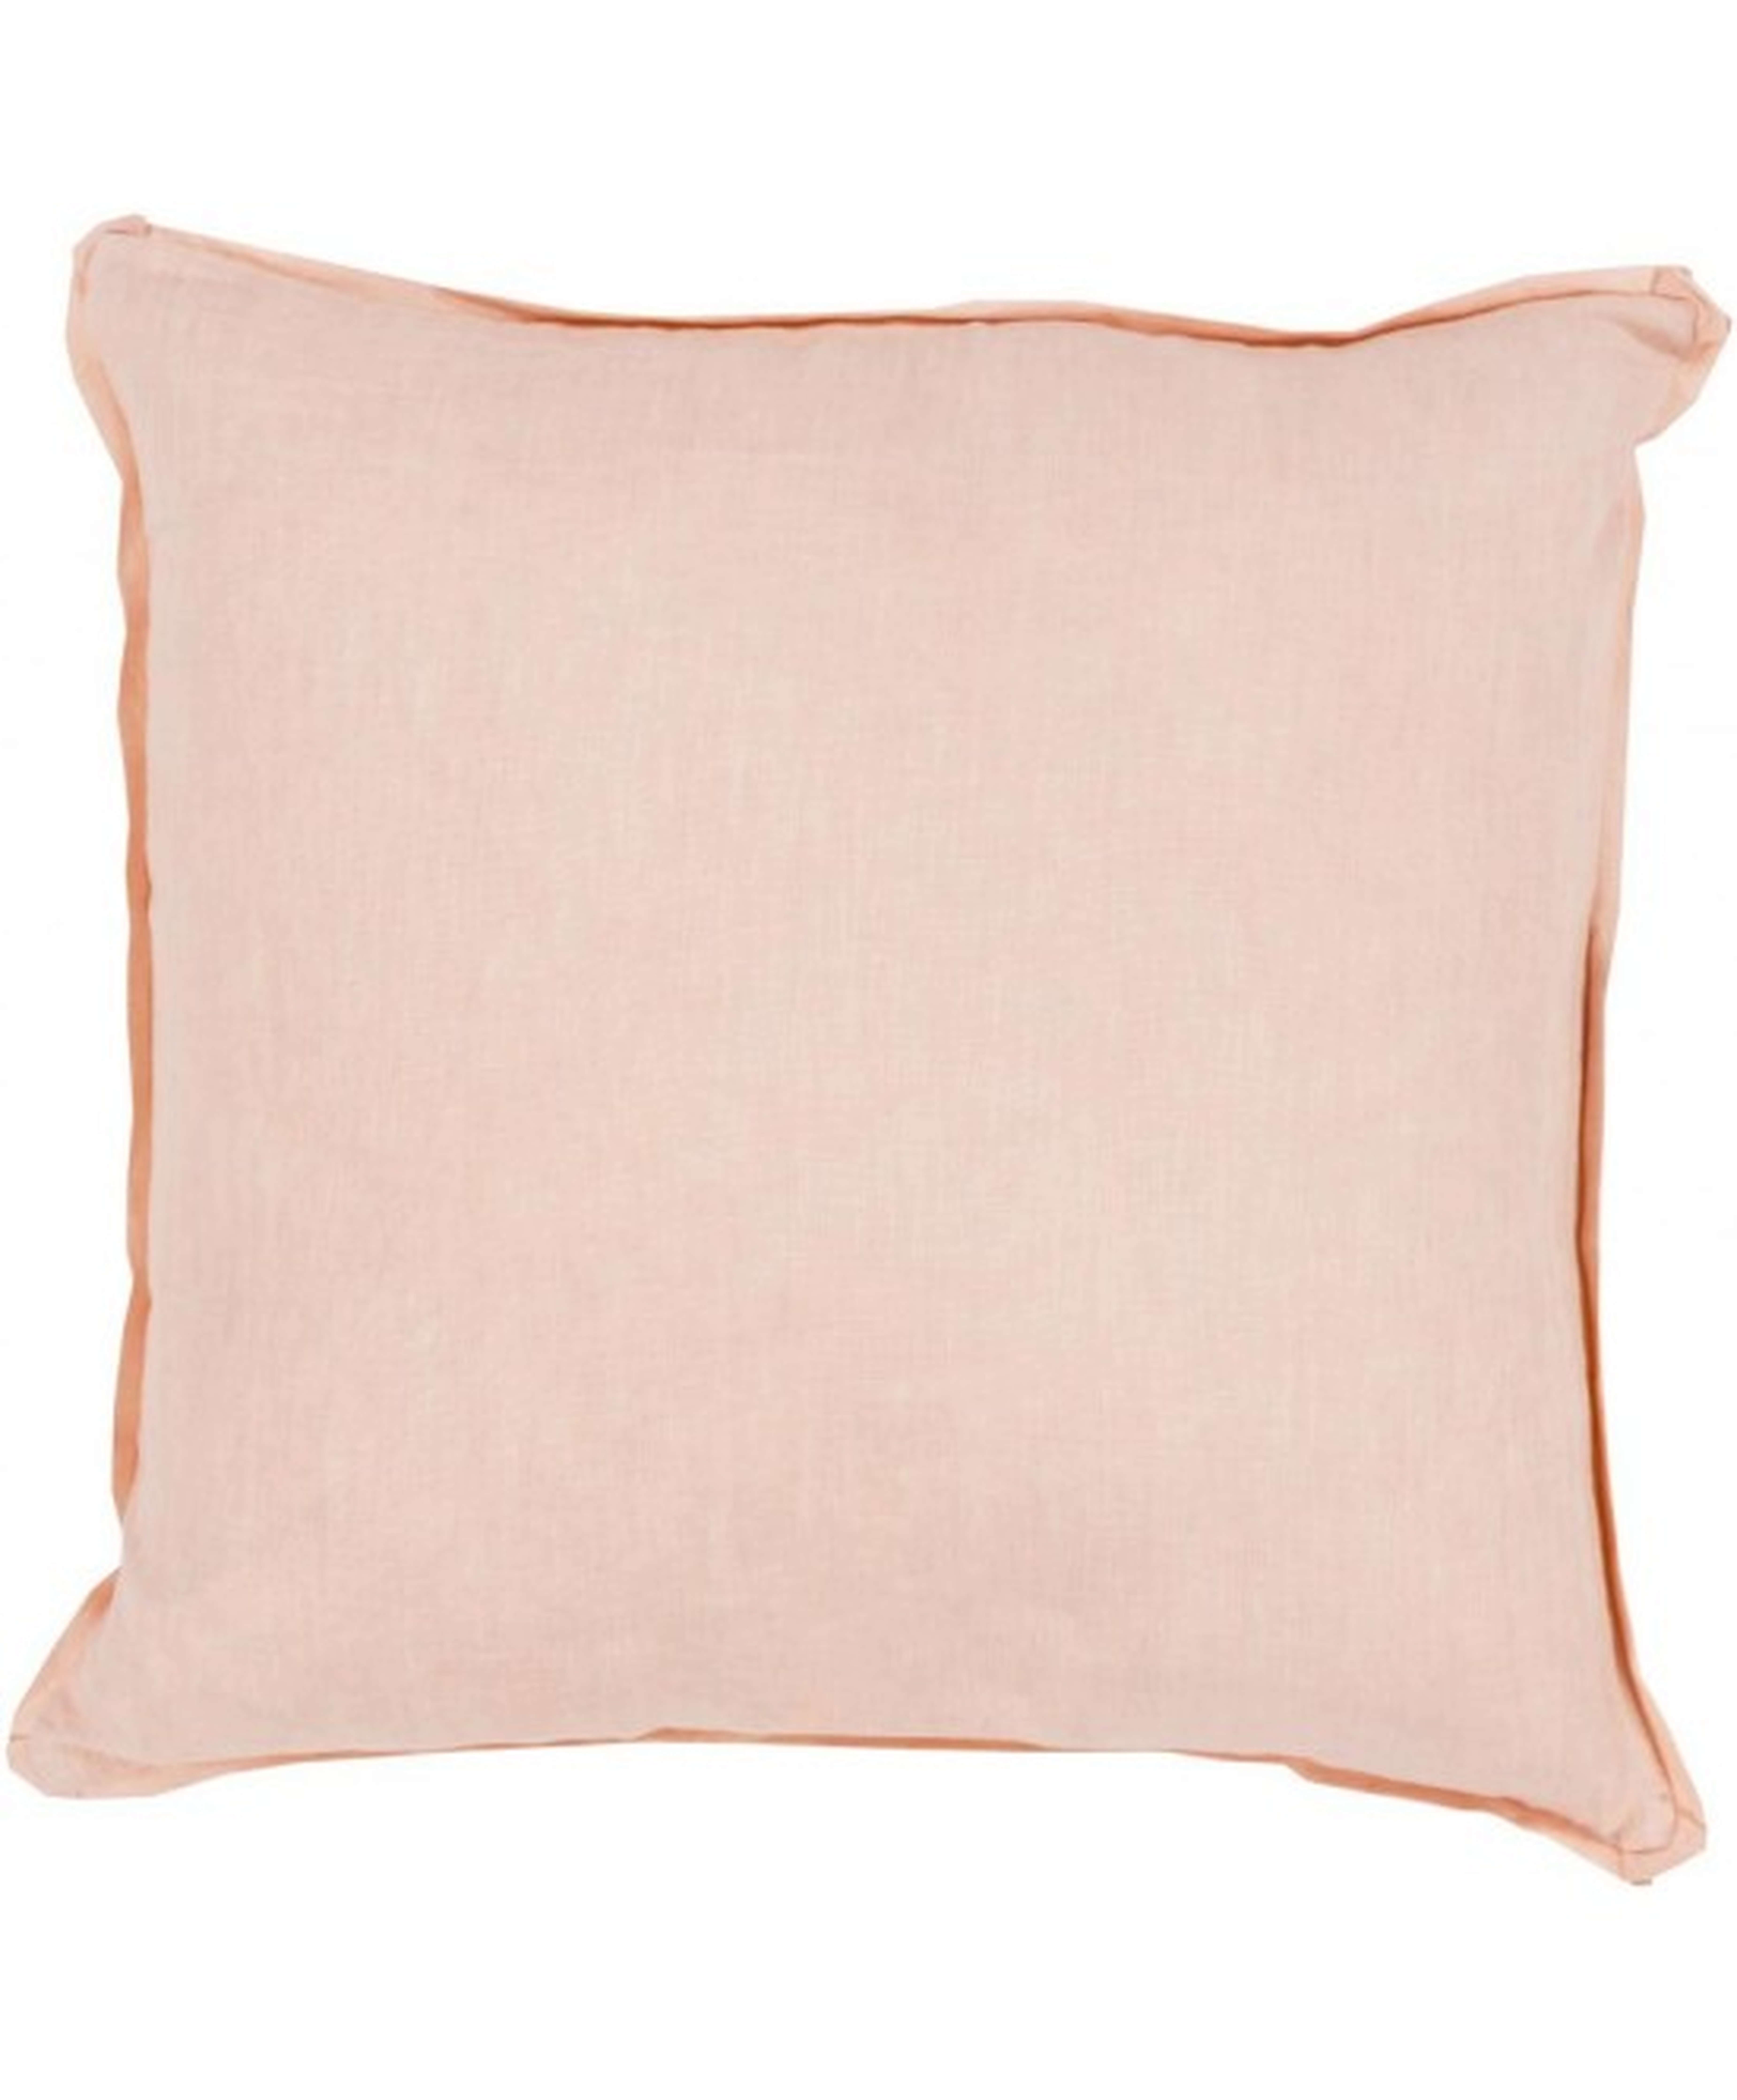 Sage Pillow - Peachy Pink - 22" x 22" - Polyester Filled - Lulu and Georgia